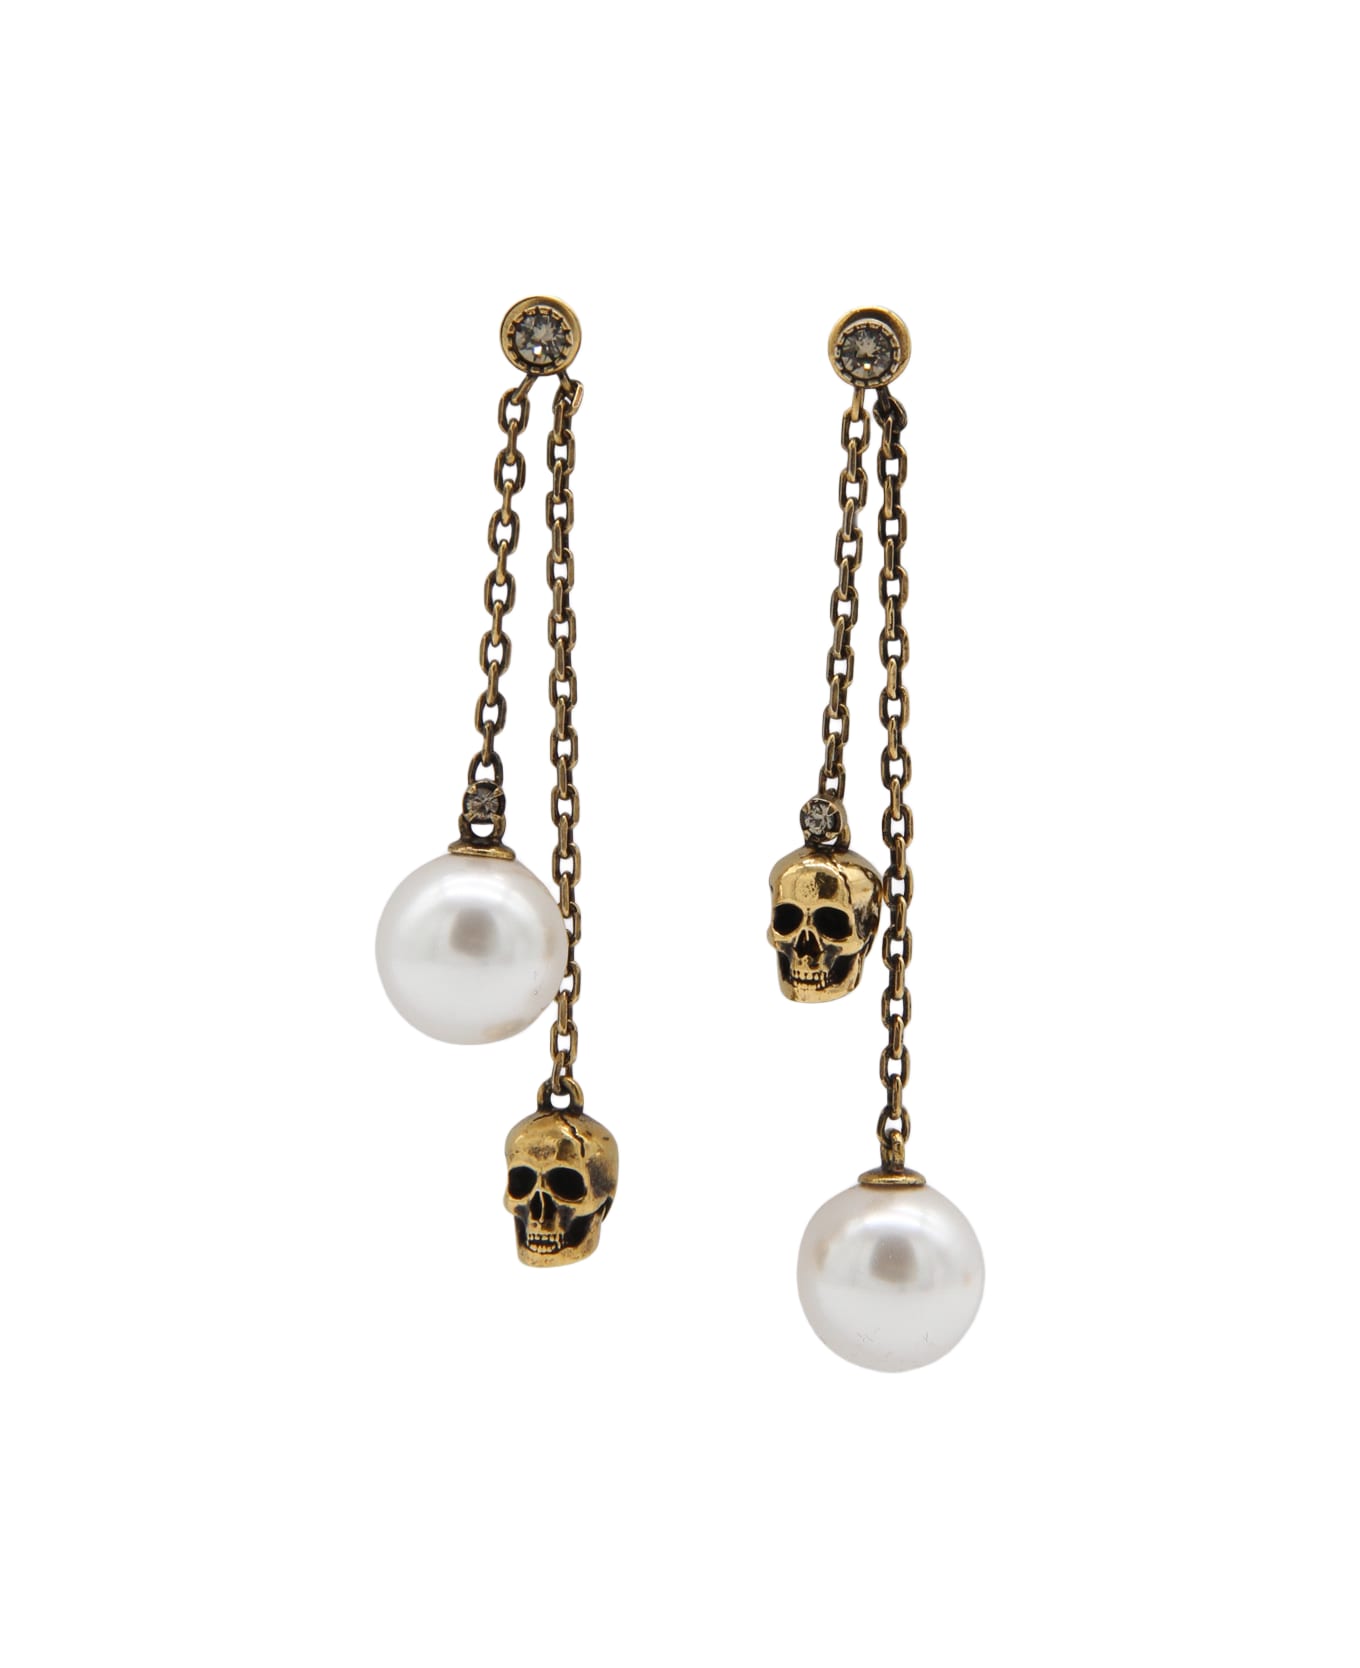 Alexander McQueen Antique Gold Metal And Pearl Skull Chain Earrings - MIX